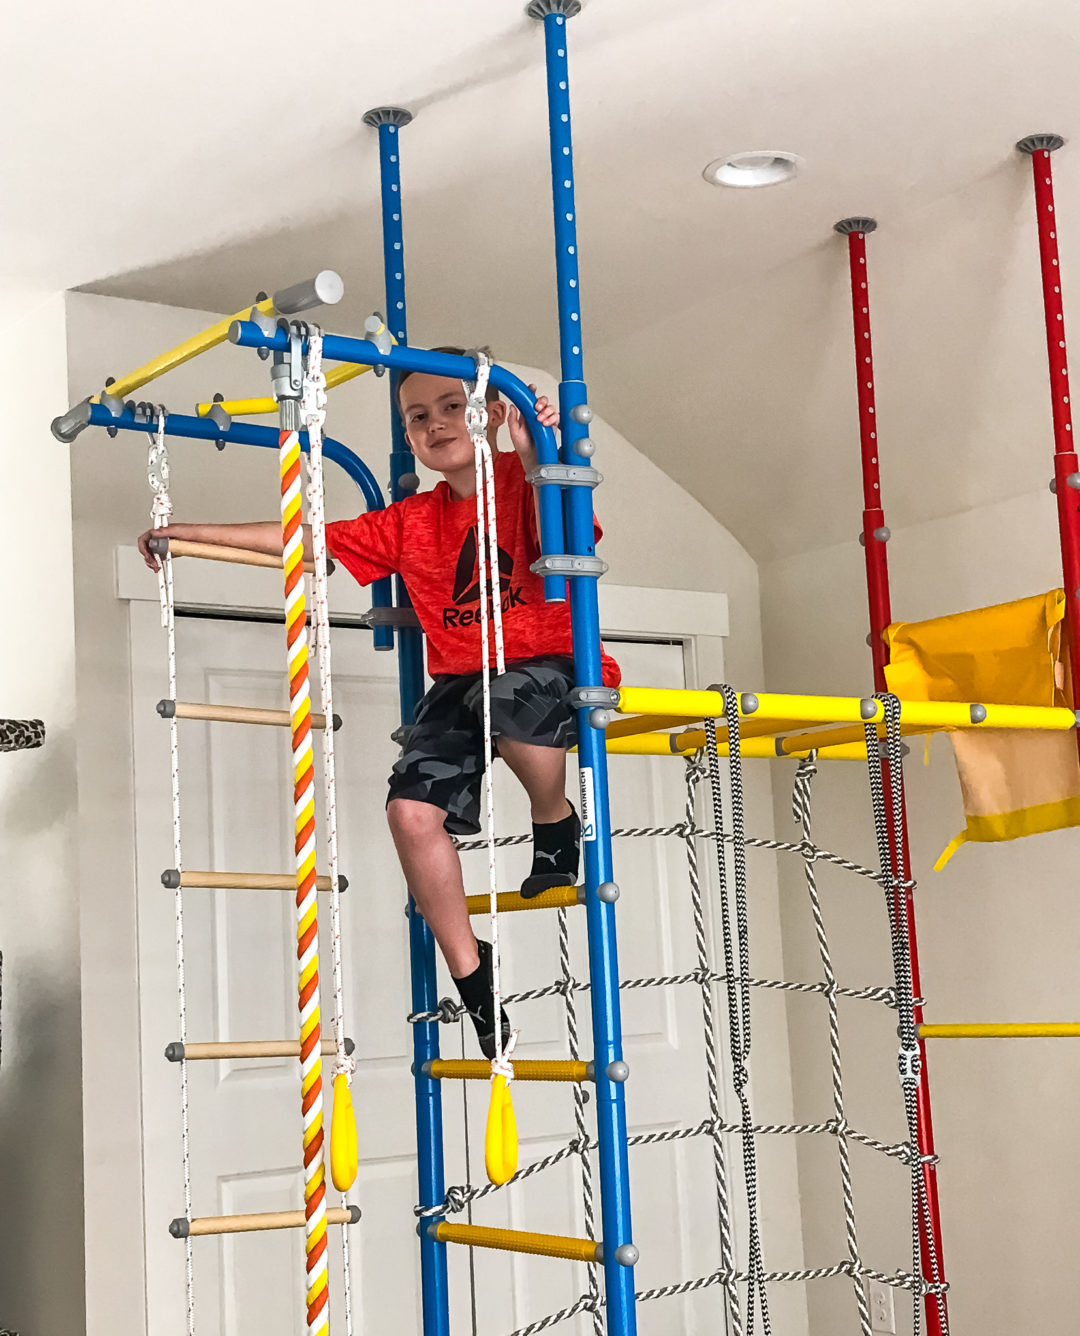 indoor jungle gym for toddlers near me